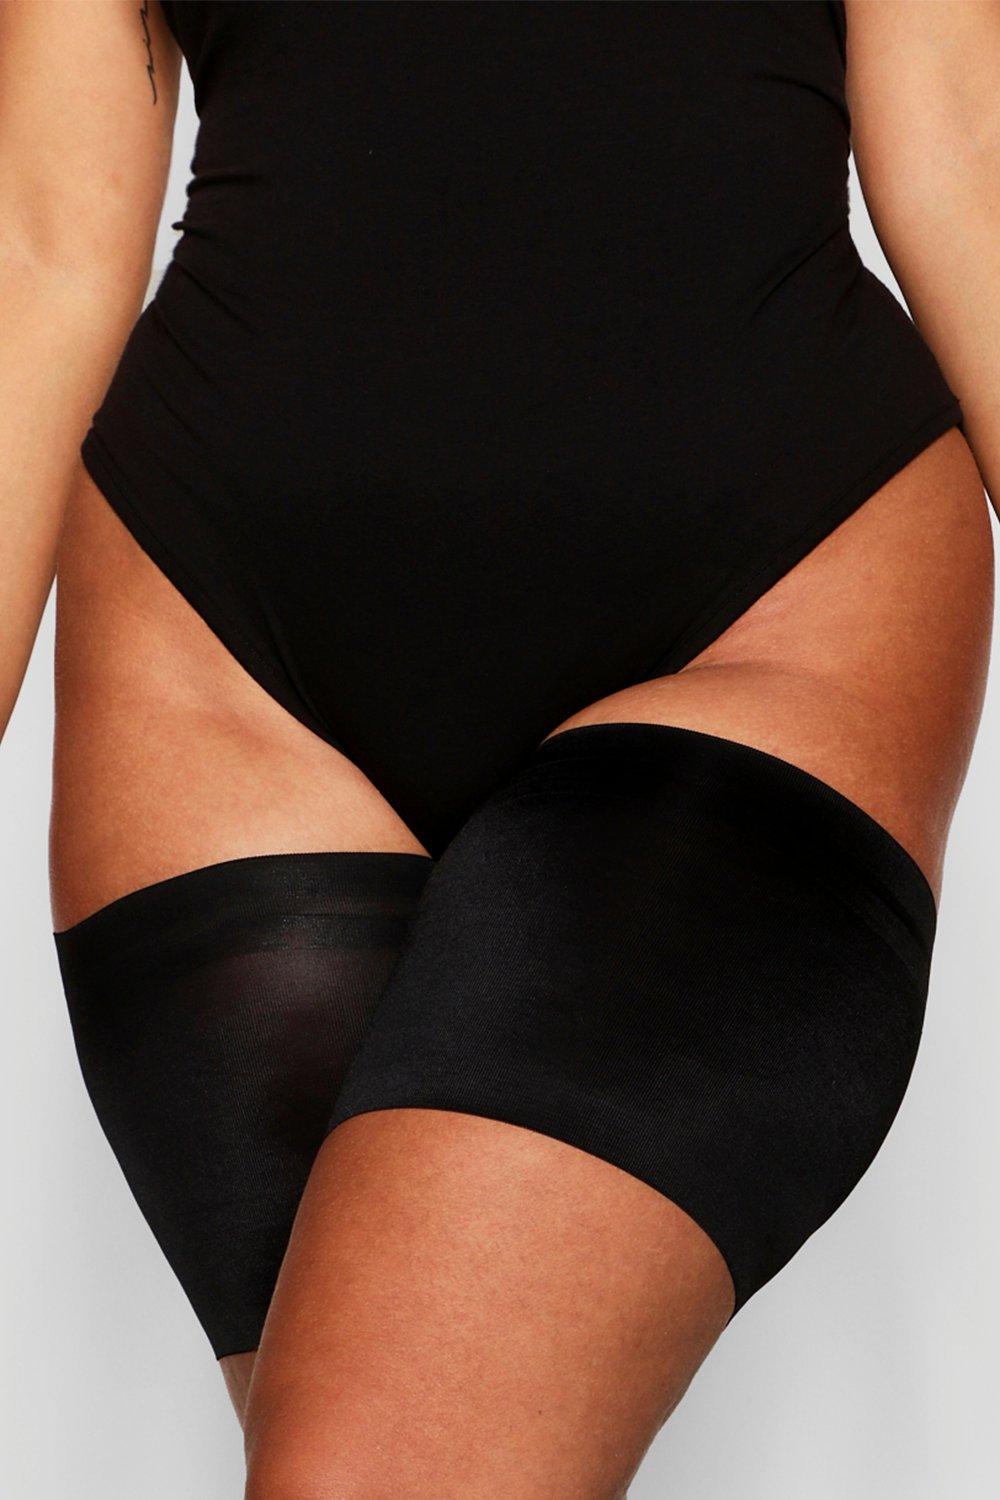 Boohoo Plus 2 Pack Anti Chafing Thigh Bands- Black  - Size: 20